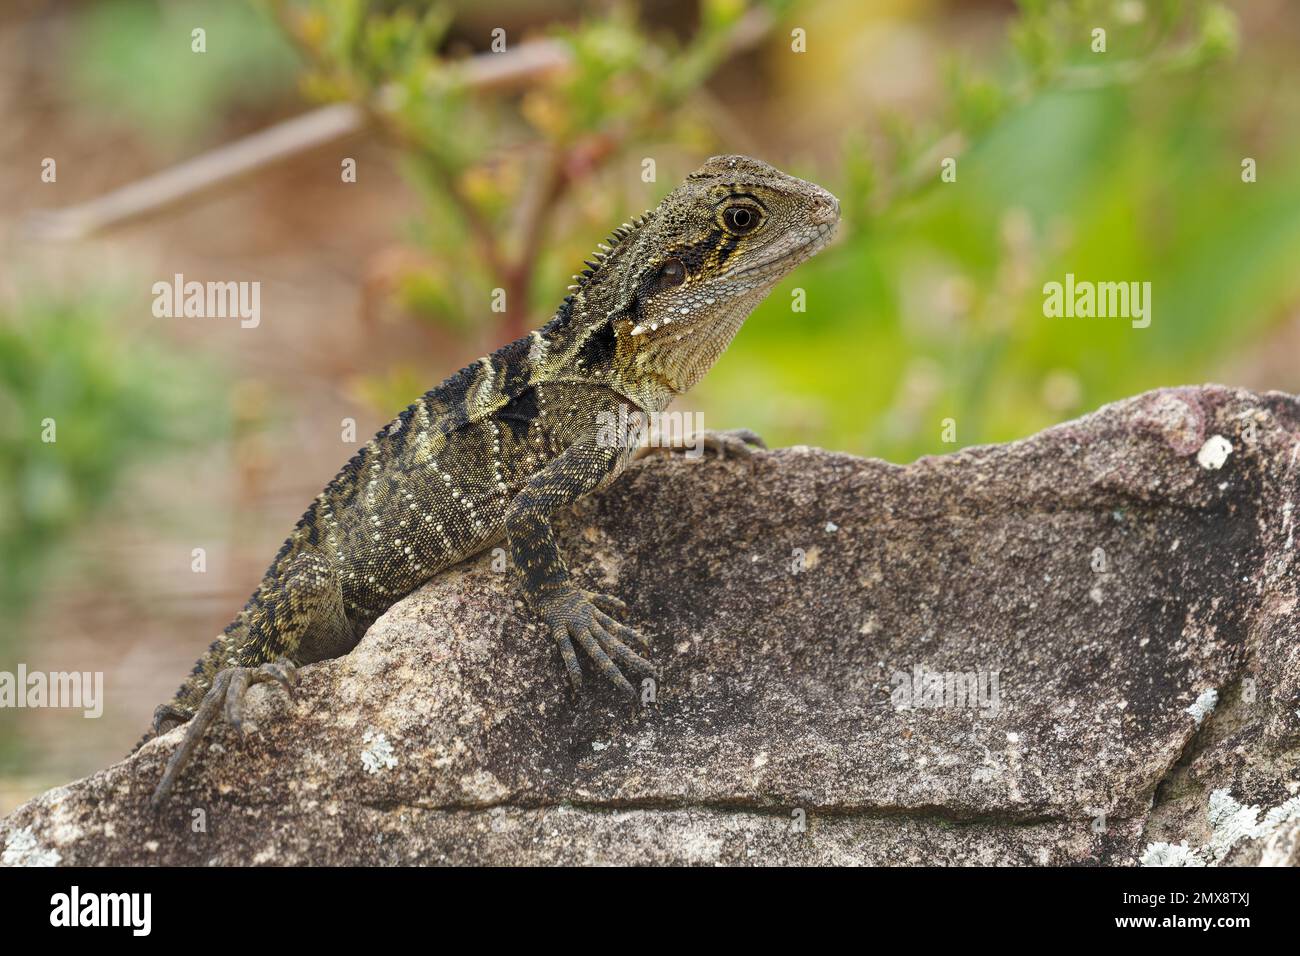 Australian Water Dragon - Intellagama or Physignathus lesueurii howittii, also Eastern or Gippsland water dragon, lizard on the rock above the sea. Stock Photo